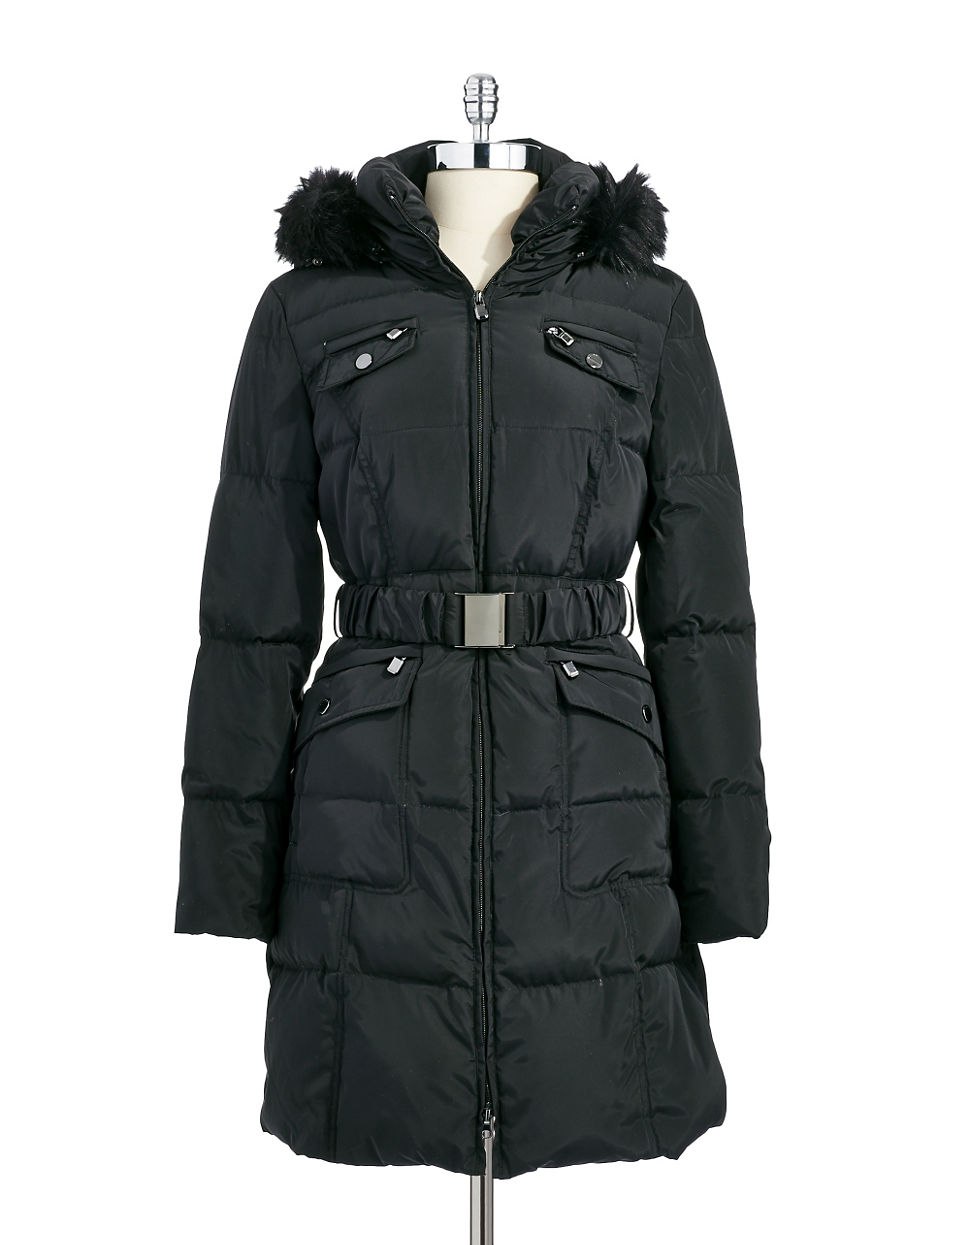 Laundry by shelli segal Hooded Down Jacket With Buckle Belt in Black | Lyst